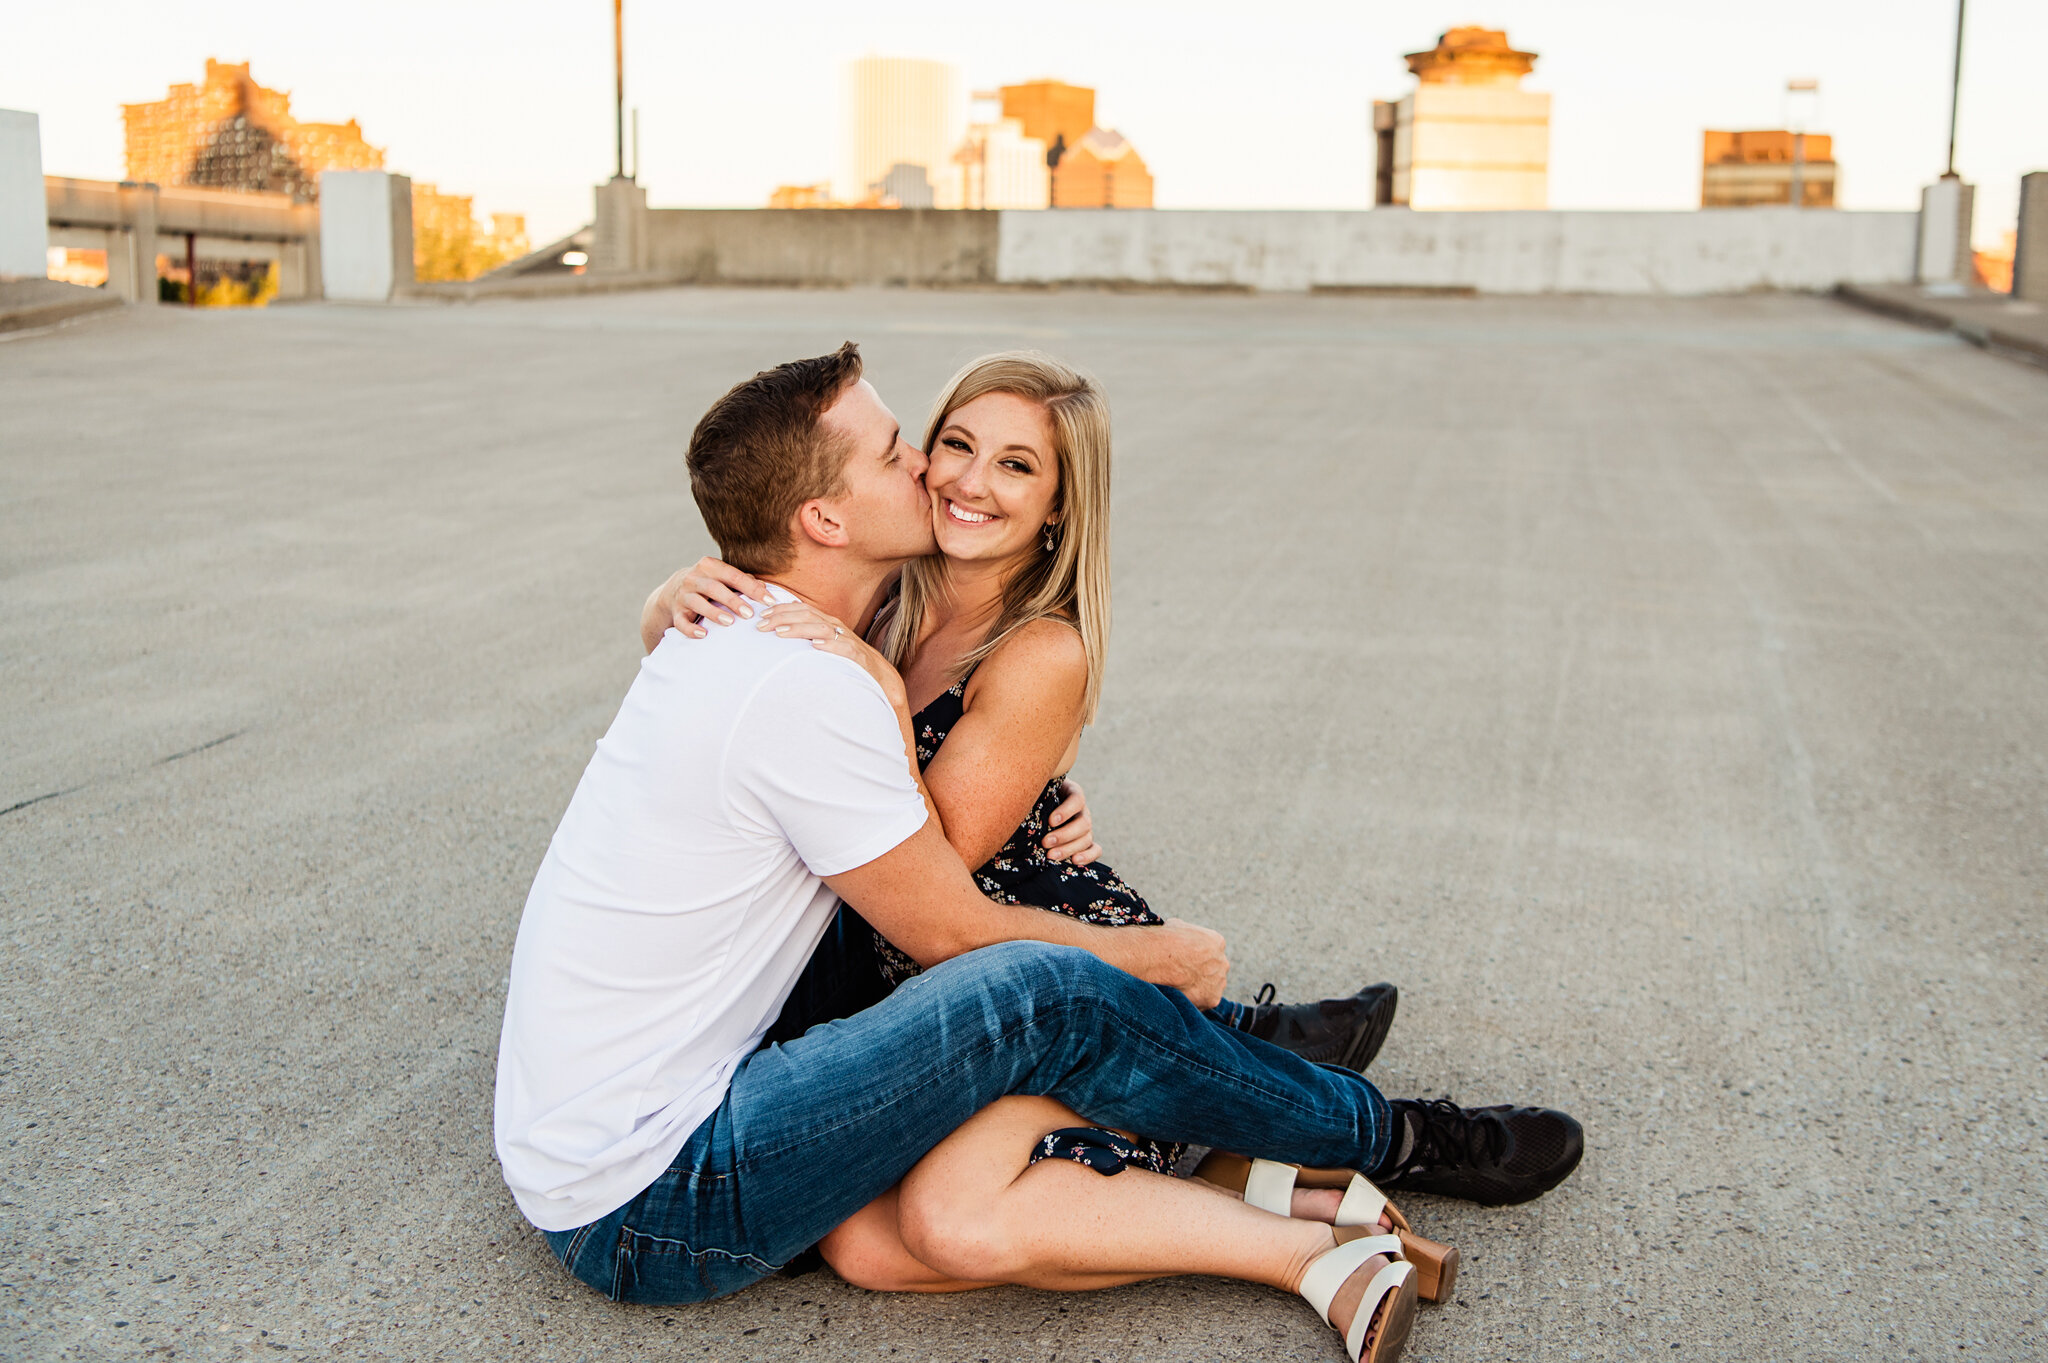 Genesee_Brew_House_High_Falls_Rochester_Engagement_Session_JILL_STUDIO_Rochester_NY_Photographer_5800.jpg